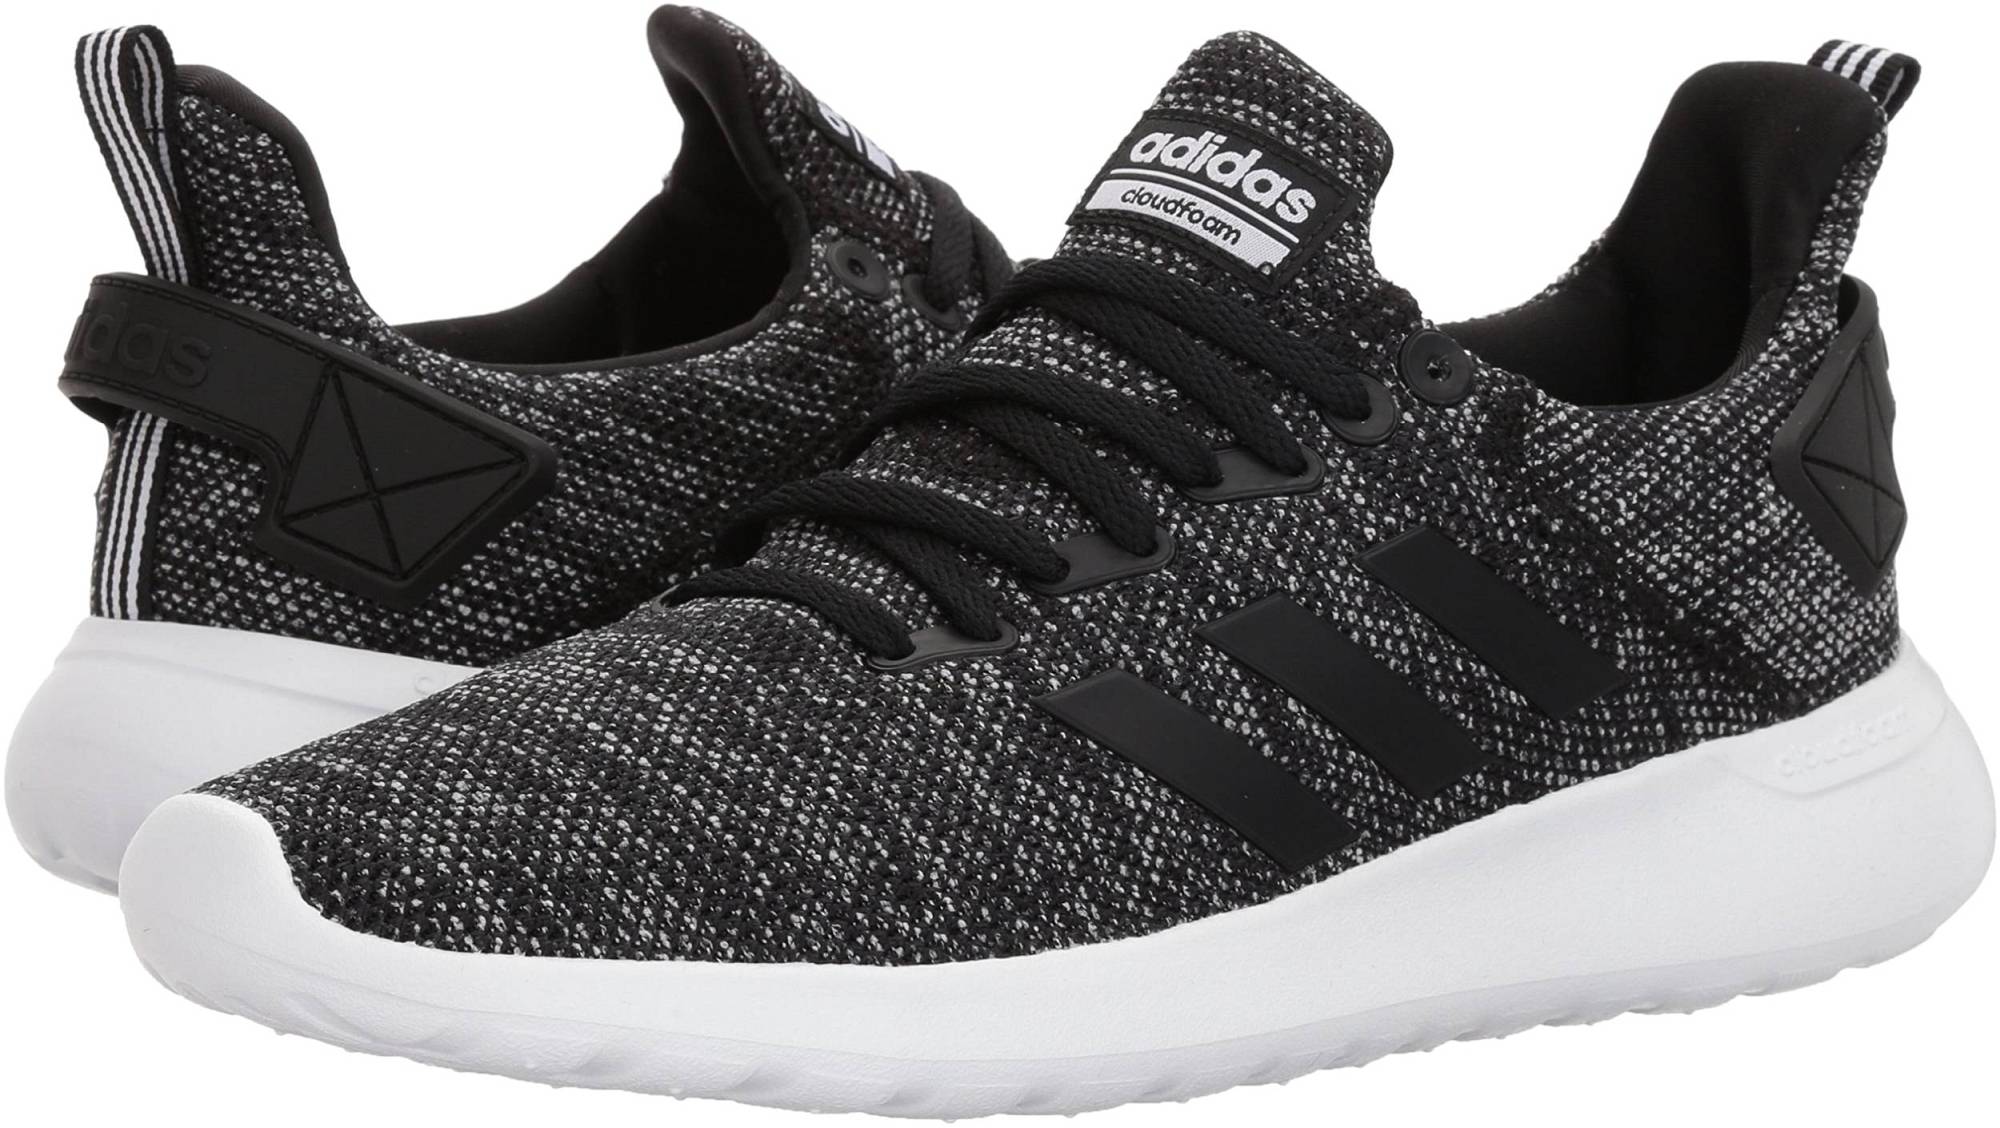 Adidas Lite Racer BYD – Shoes Reviews & Reasons To Buy